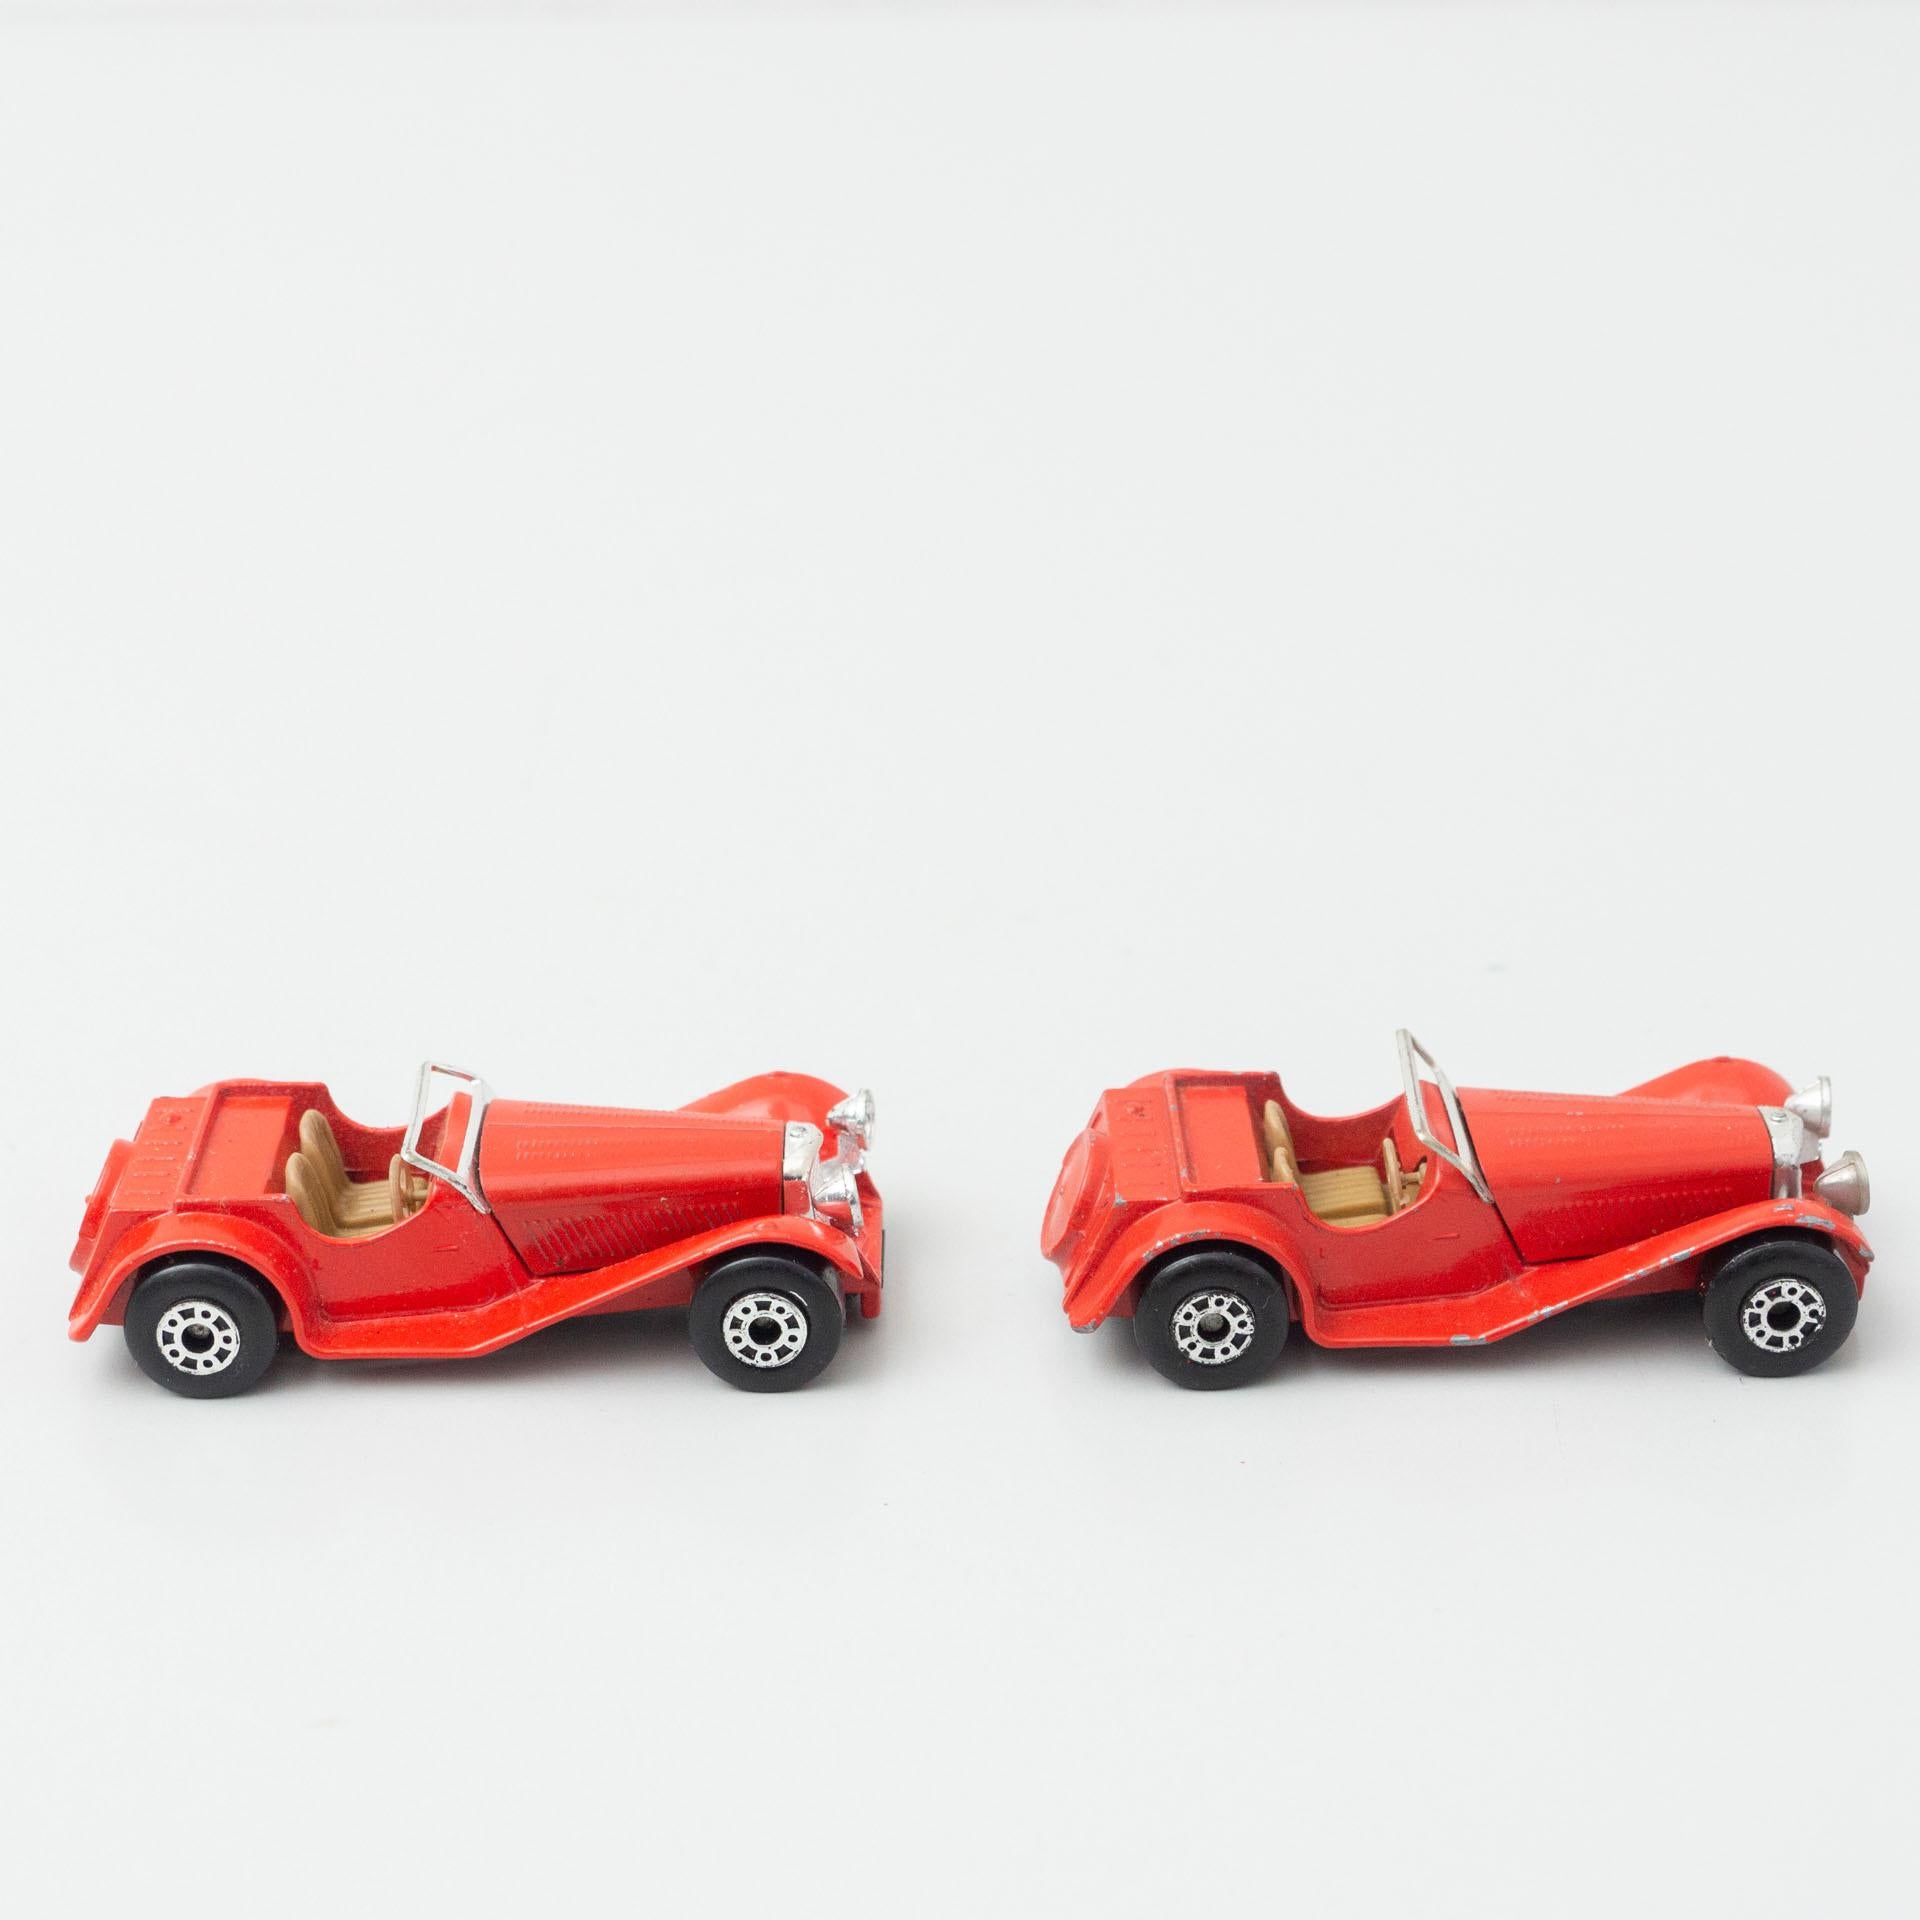 Set of Two Vintage Ssico Jaguar Match Box Car Toys, circa 1960 In Good Condition For Sale In Barcelona, Barcelona